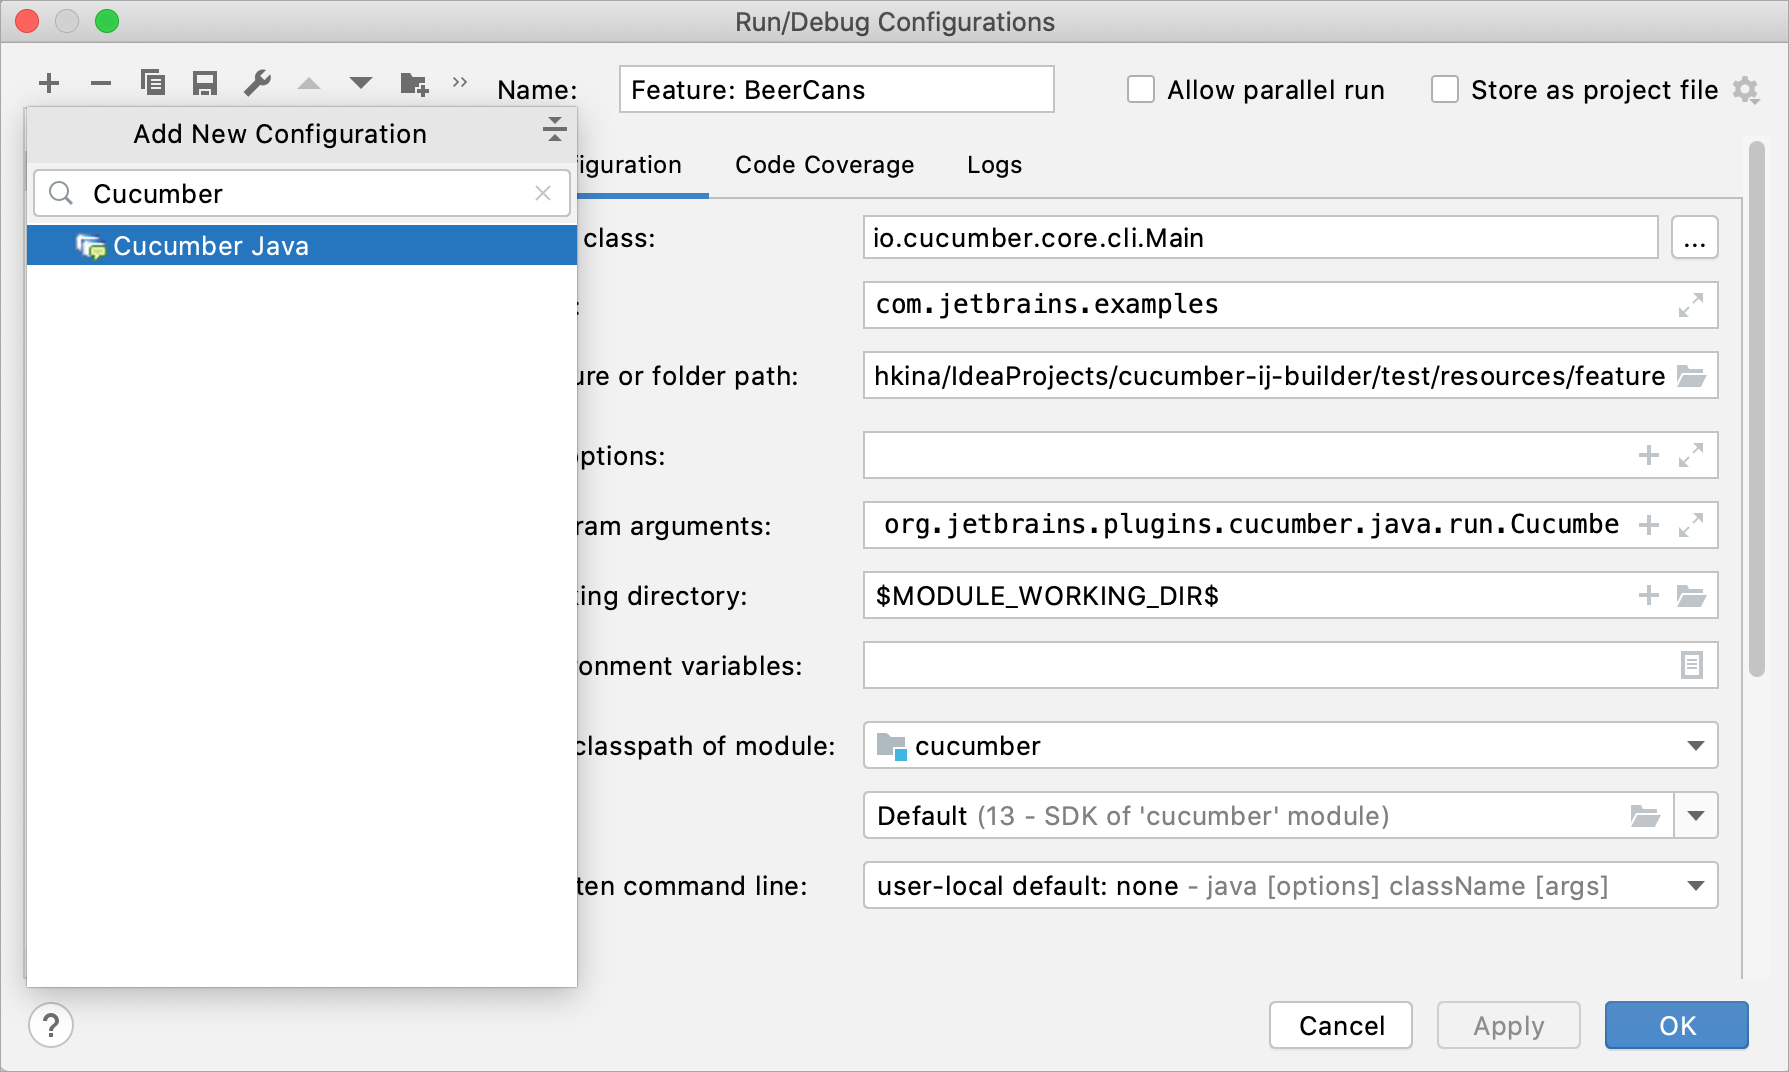 Creating new run configuration for Cucumber